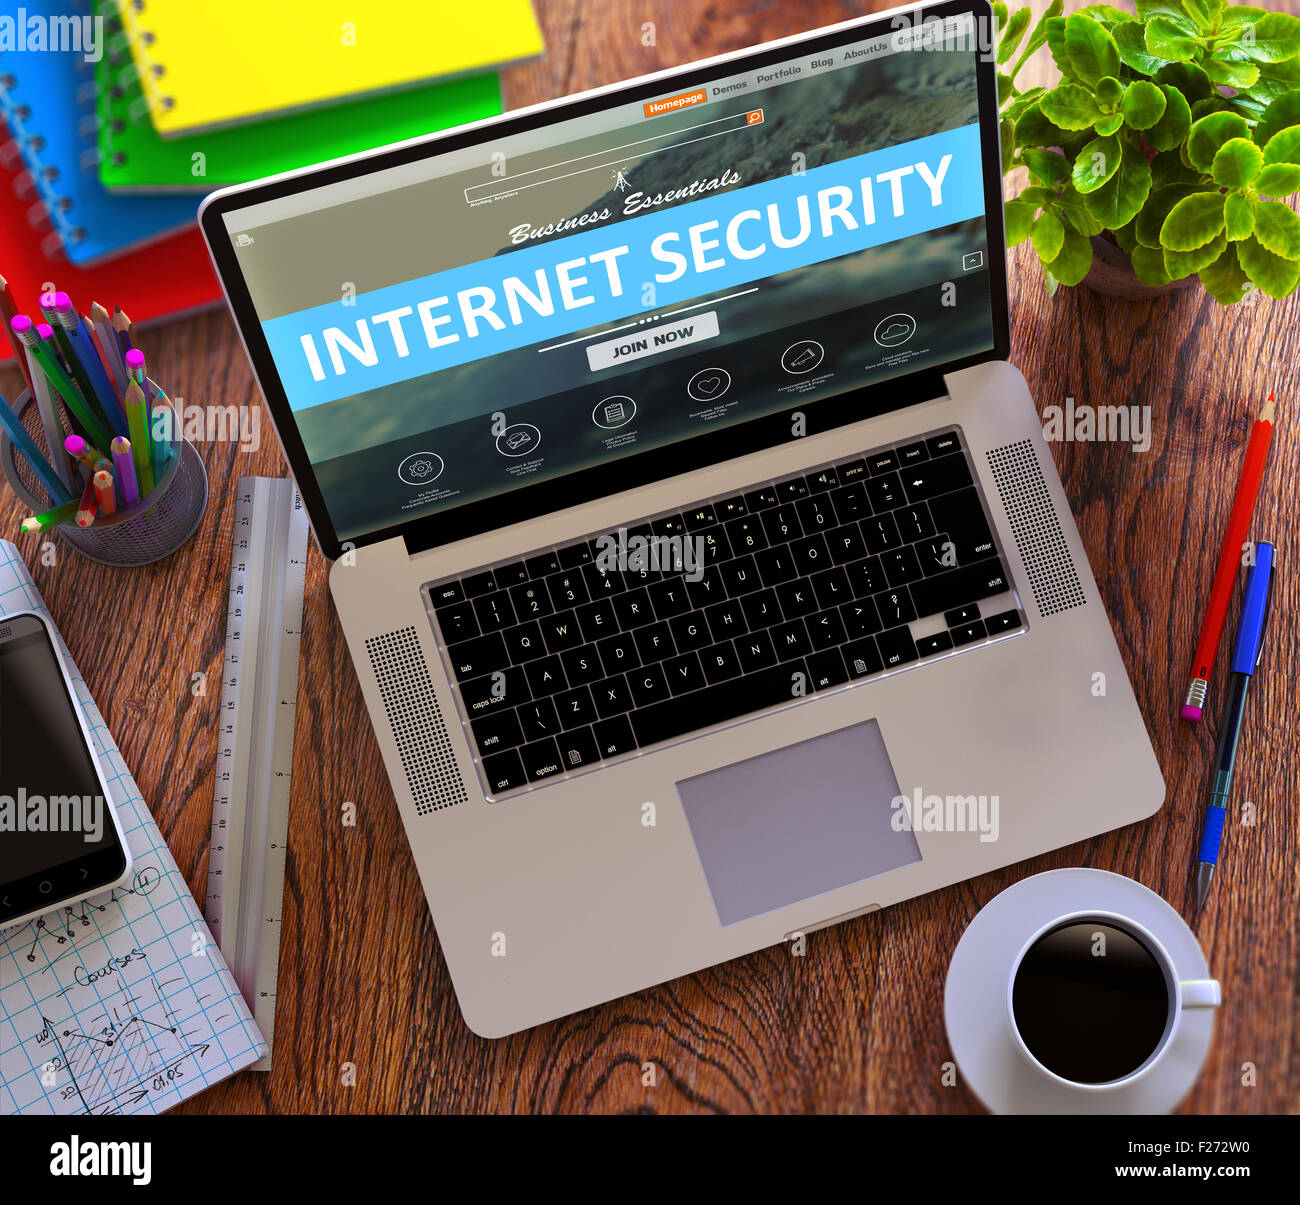 Internet Security. Online Working Concept. Stock Photo